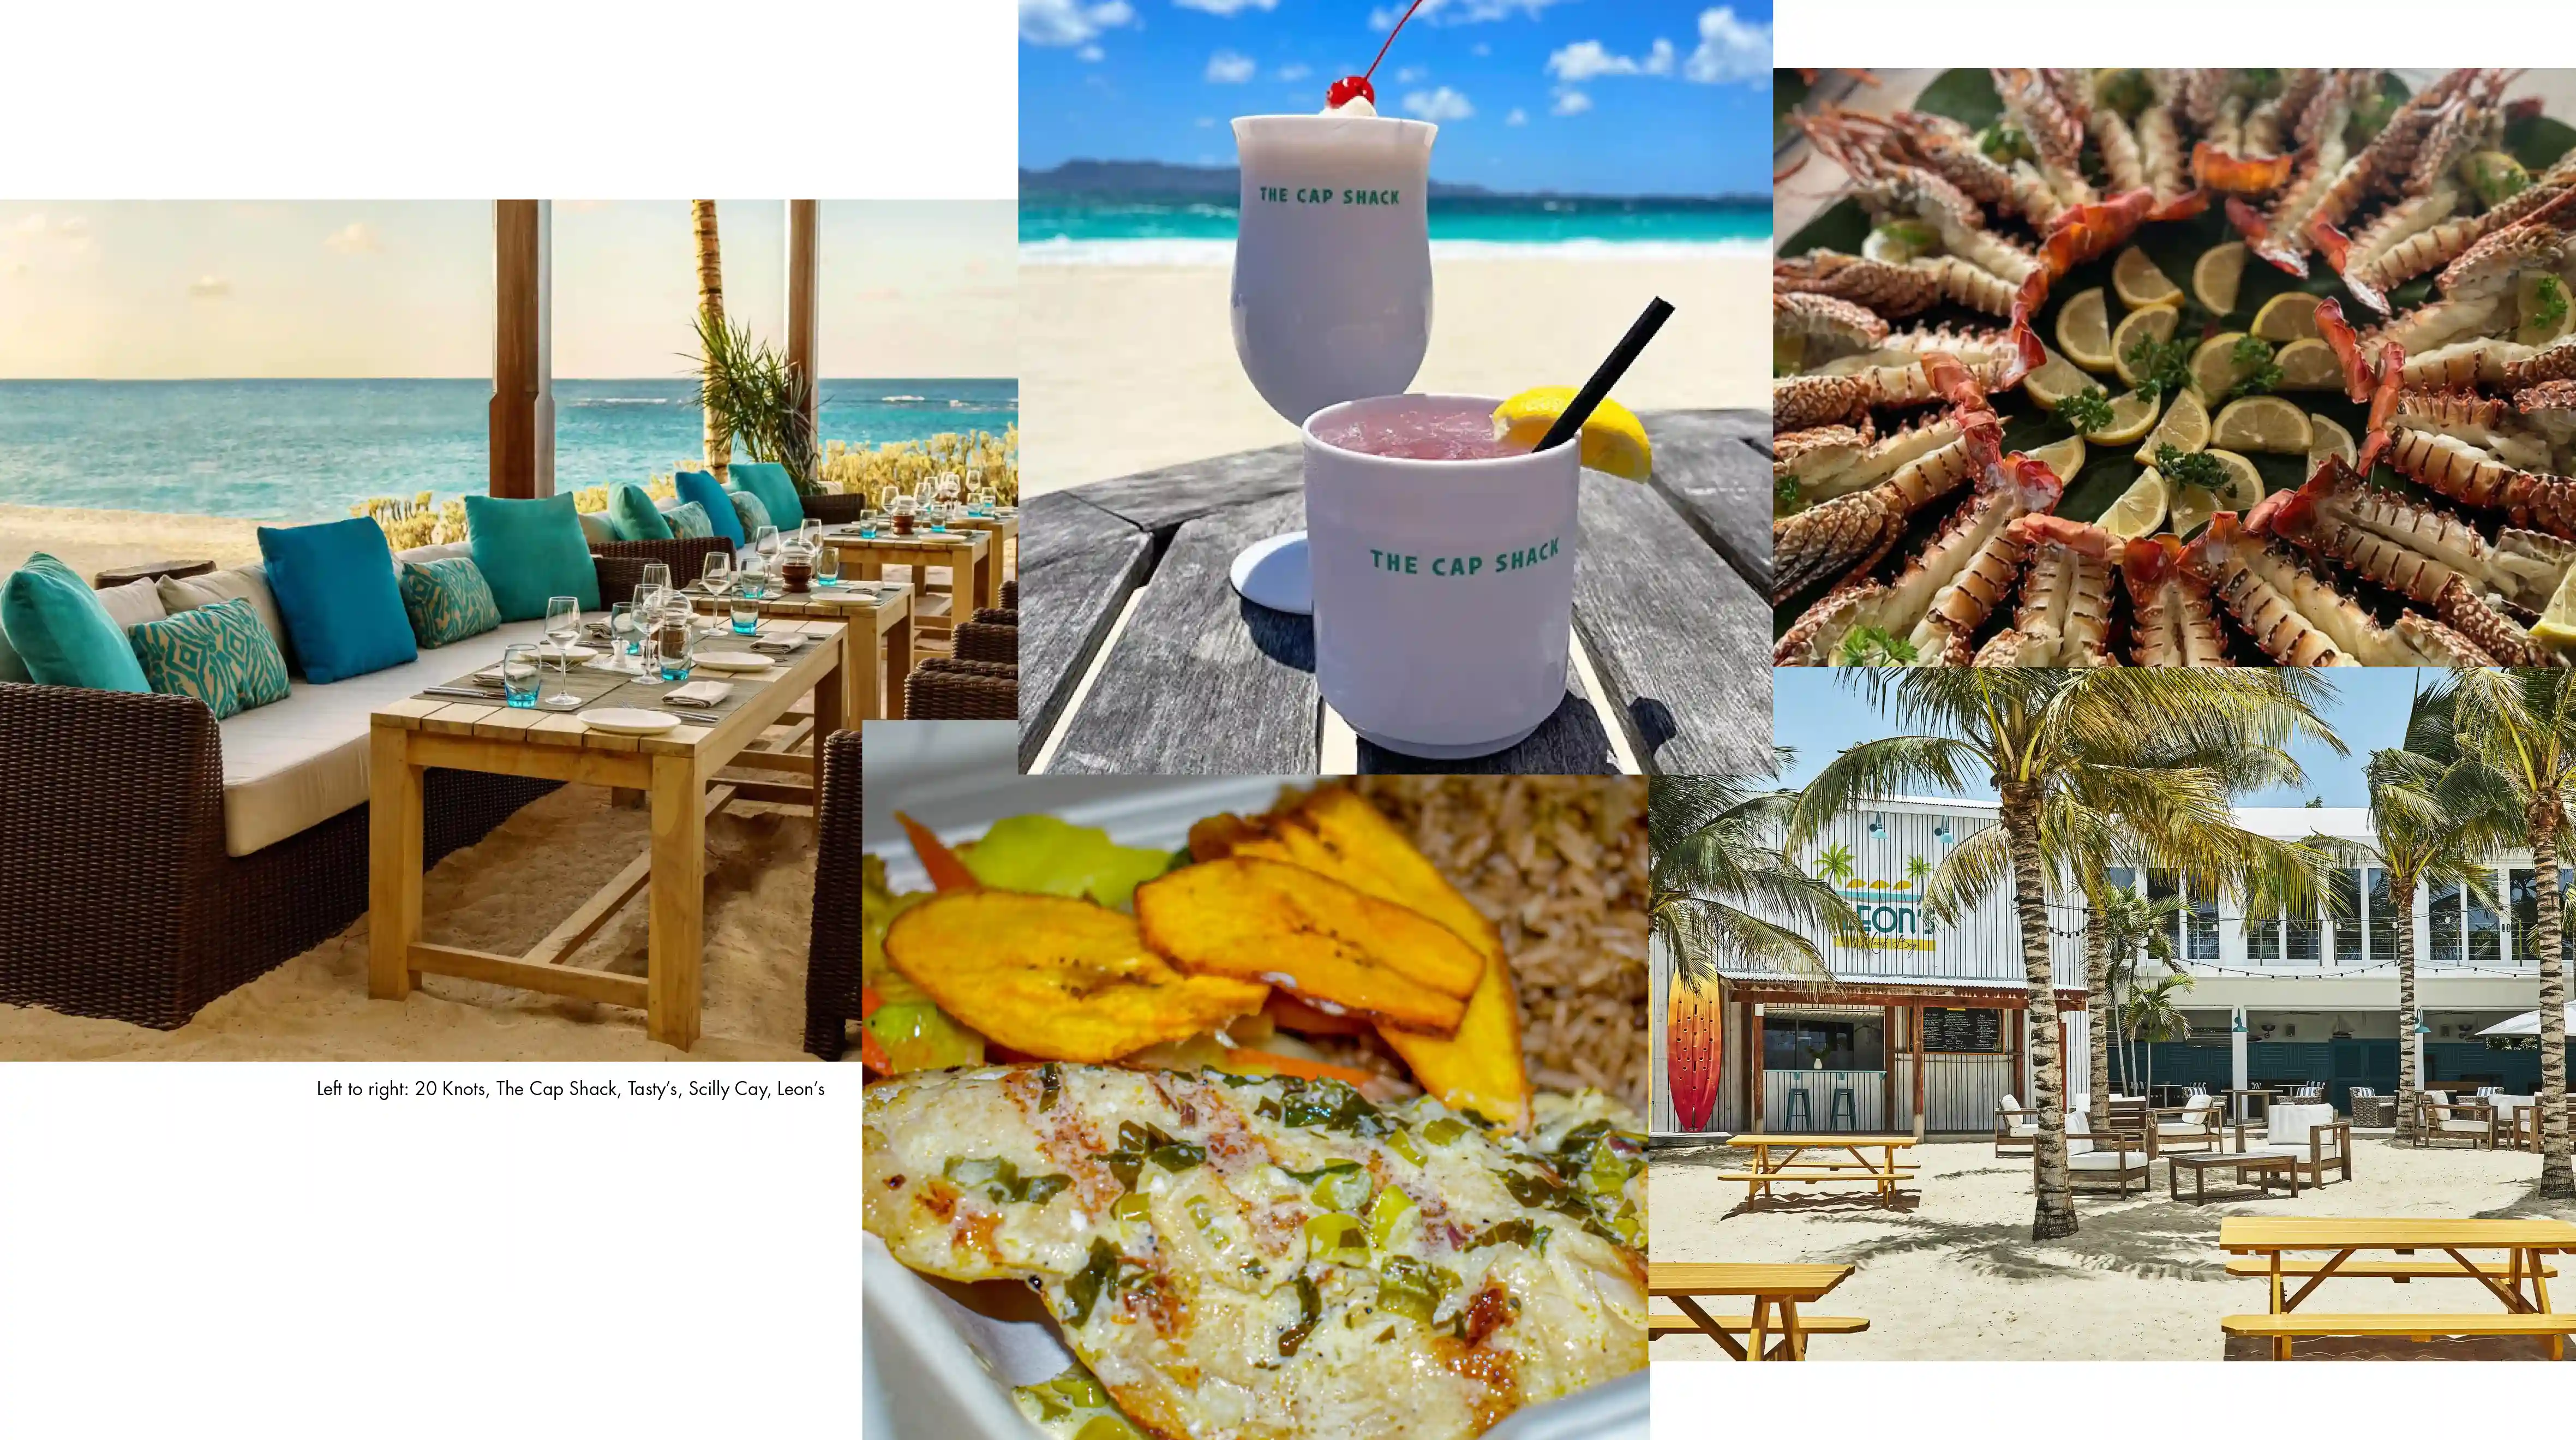 Restaurants in Anguilla for Local Food